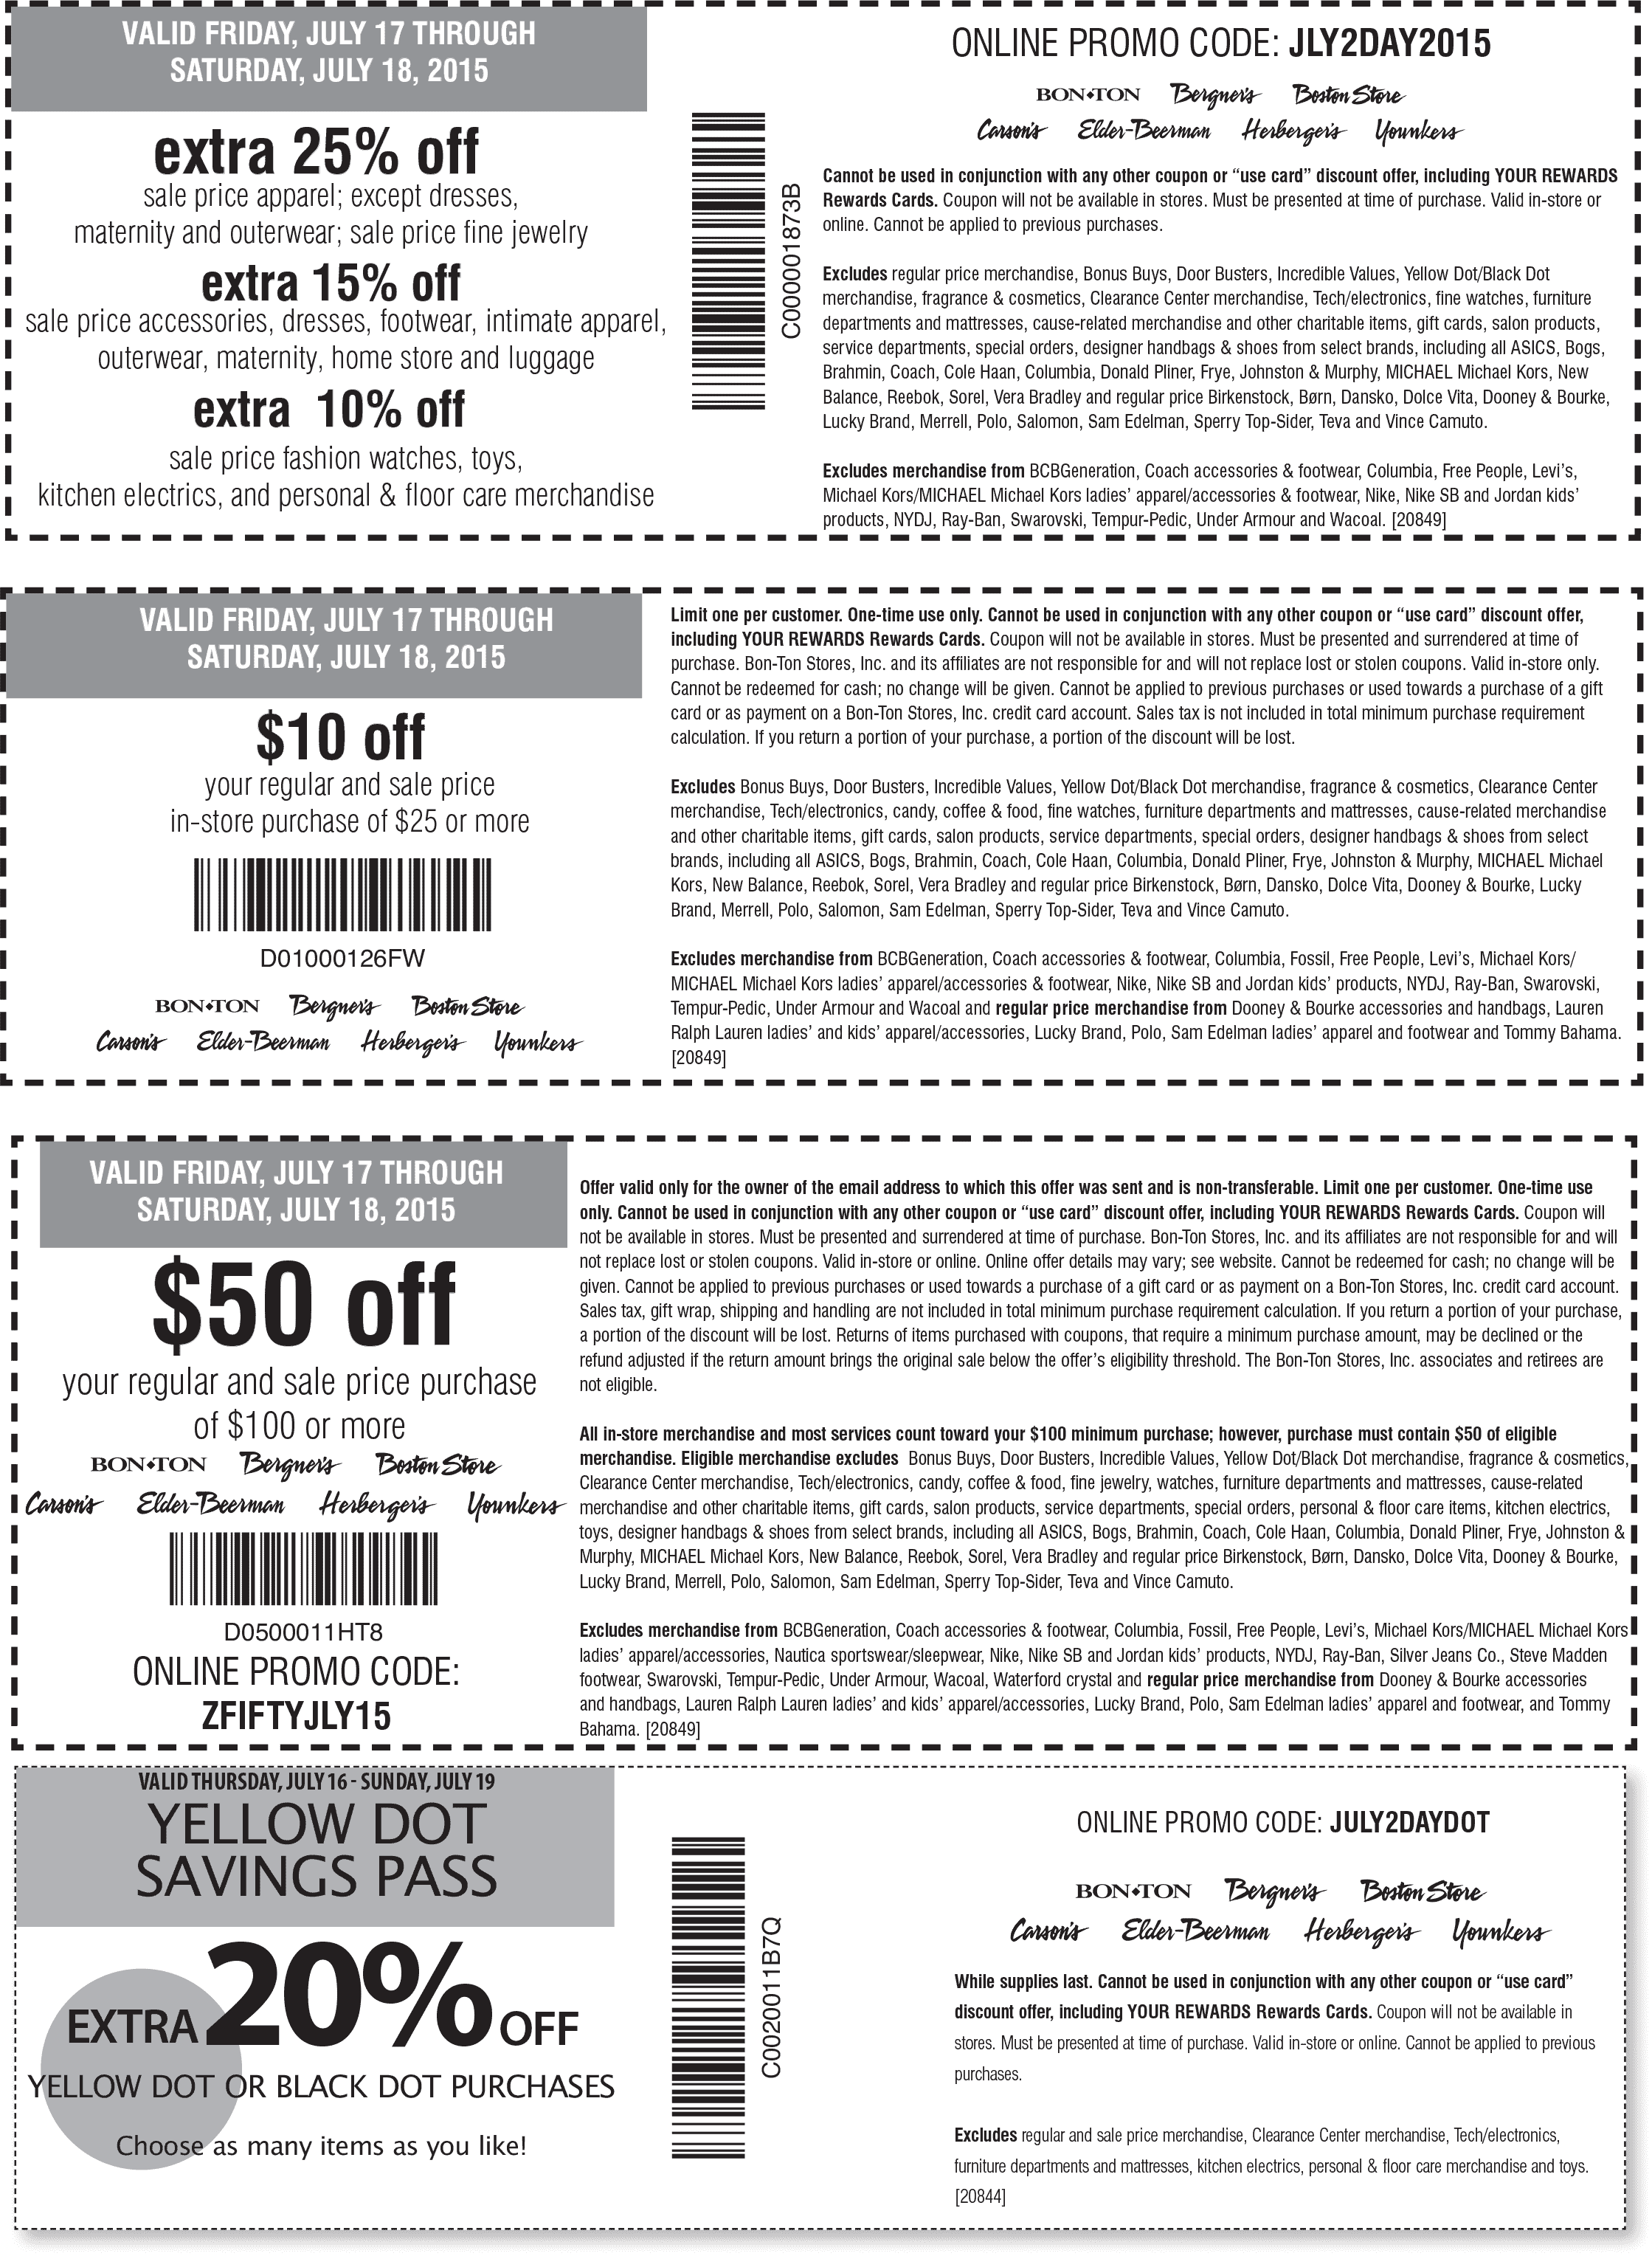 Carsons Coupon April 2024 $50 off $100 & more today at Carsons, Bon Ton & sister stores, or online via promo code ZFIFTYJLY15